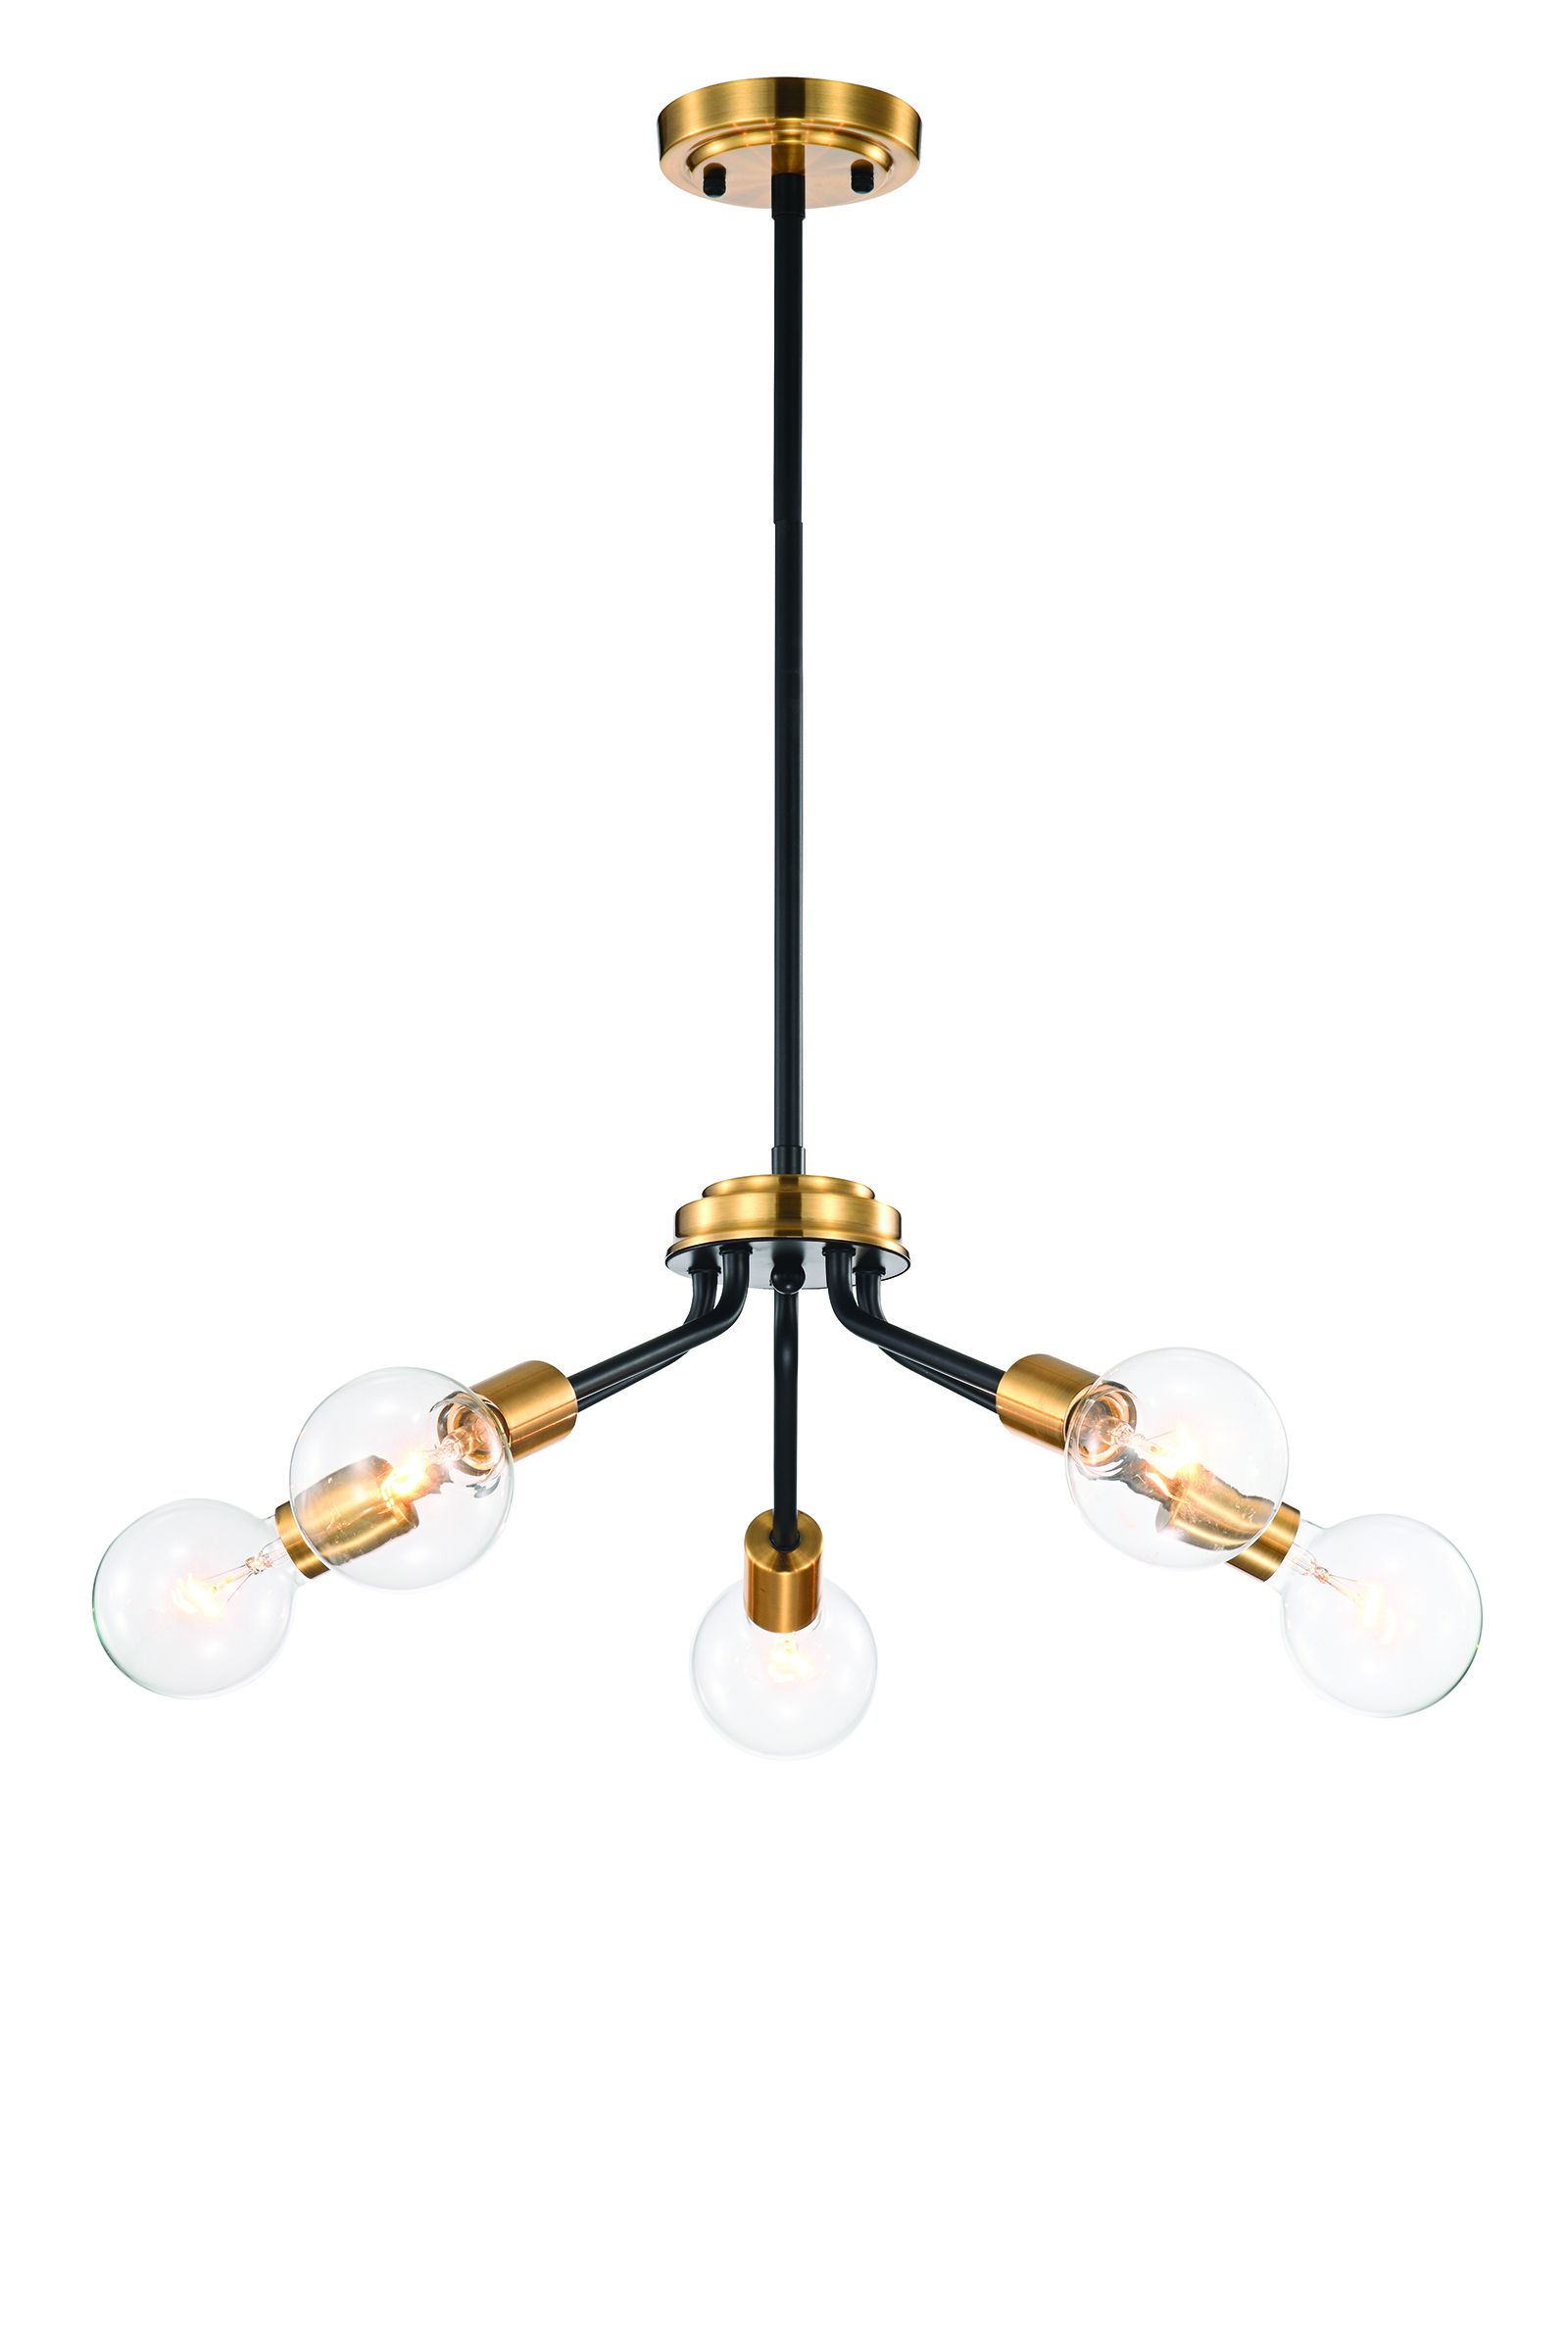 5 Light Black And Antique Gold Modern Contemporary Sputnik Pertaining To Gold And Wood Sputnik Orb Chandeliers (View 2 of 15)